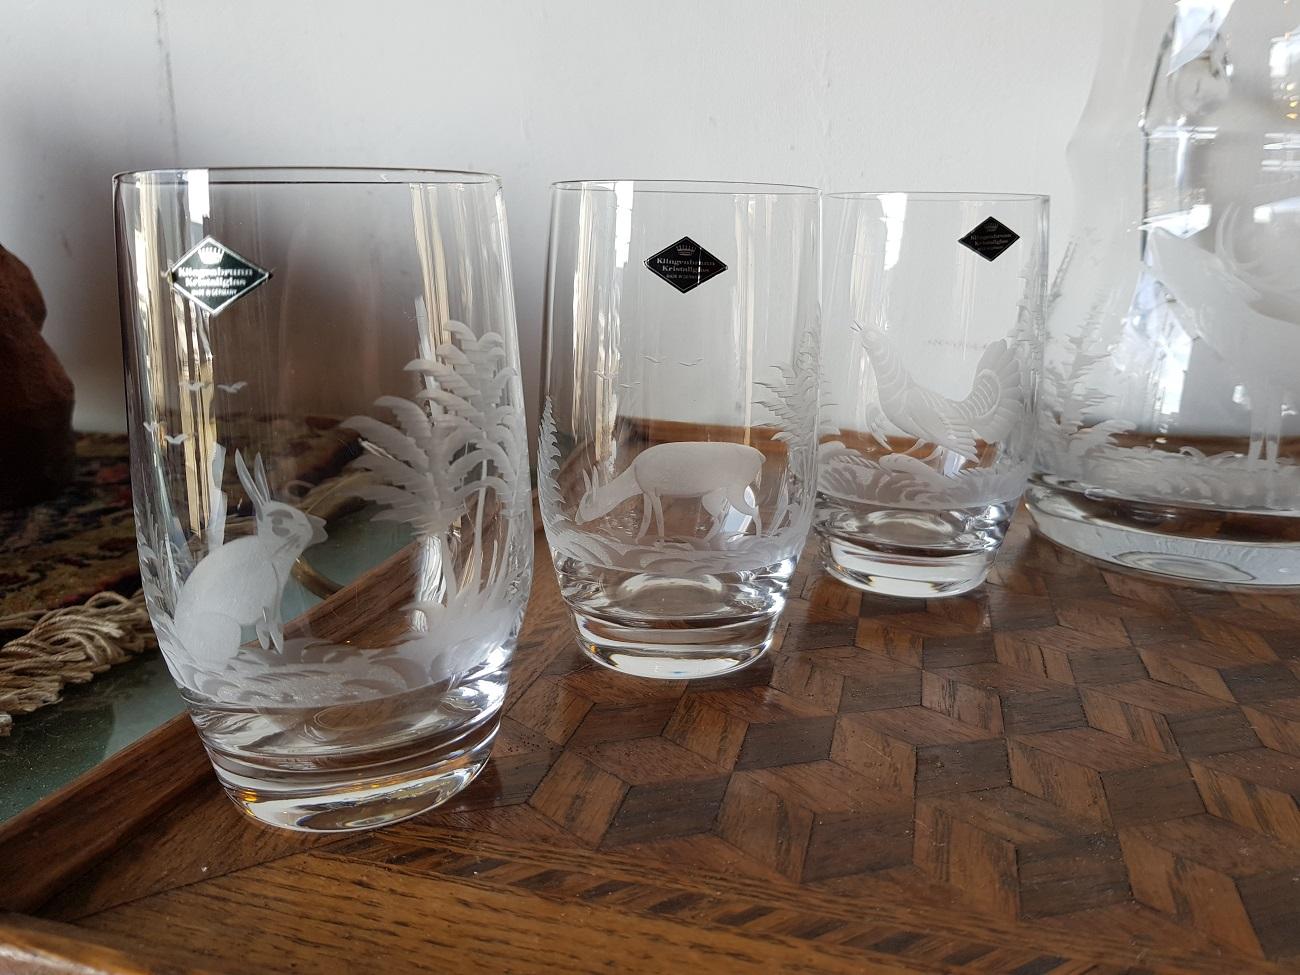 Fabulous German crystal water jug set with six glasses and all are engraved with representations of various animals and all in mint condition, late 20th century.

The measurements of the jug is:
Depth 11 cm/ 4.3 inch.
Width 11 cm/ 4.3